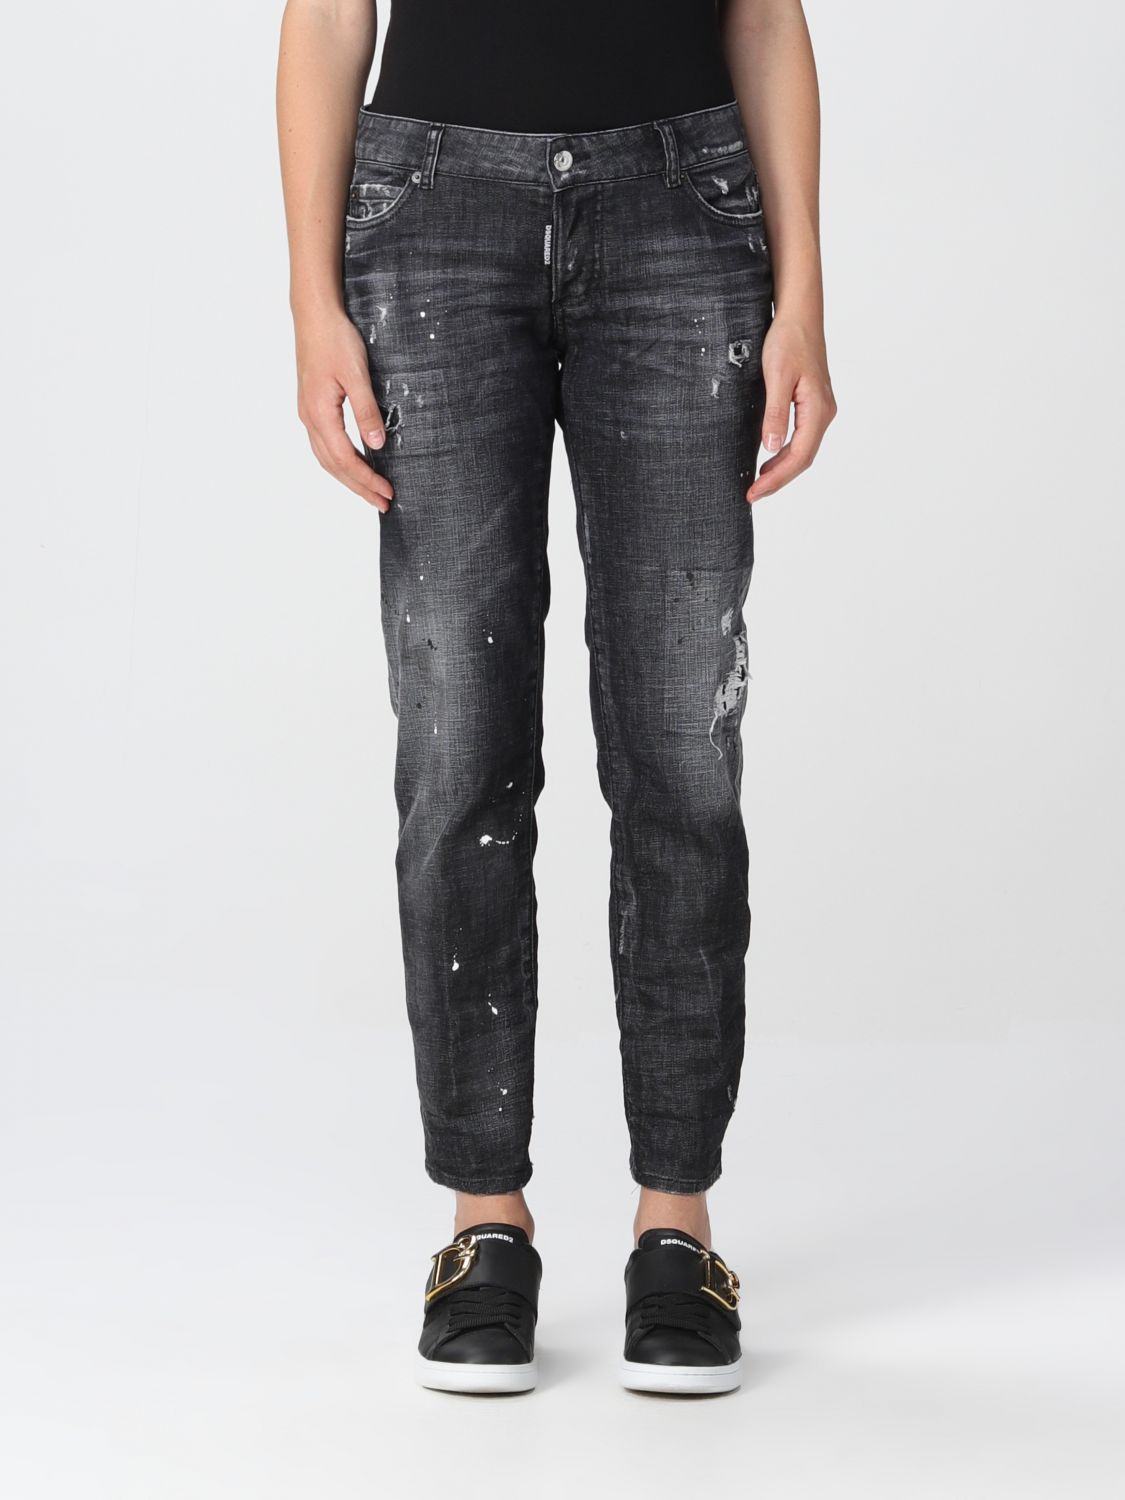 DSQUARED2: for woman Black | jeans S75LB0655S30357 online on GIGLIO.COM